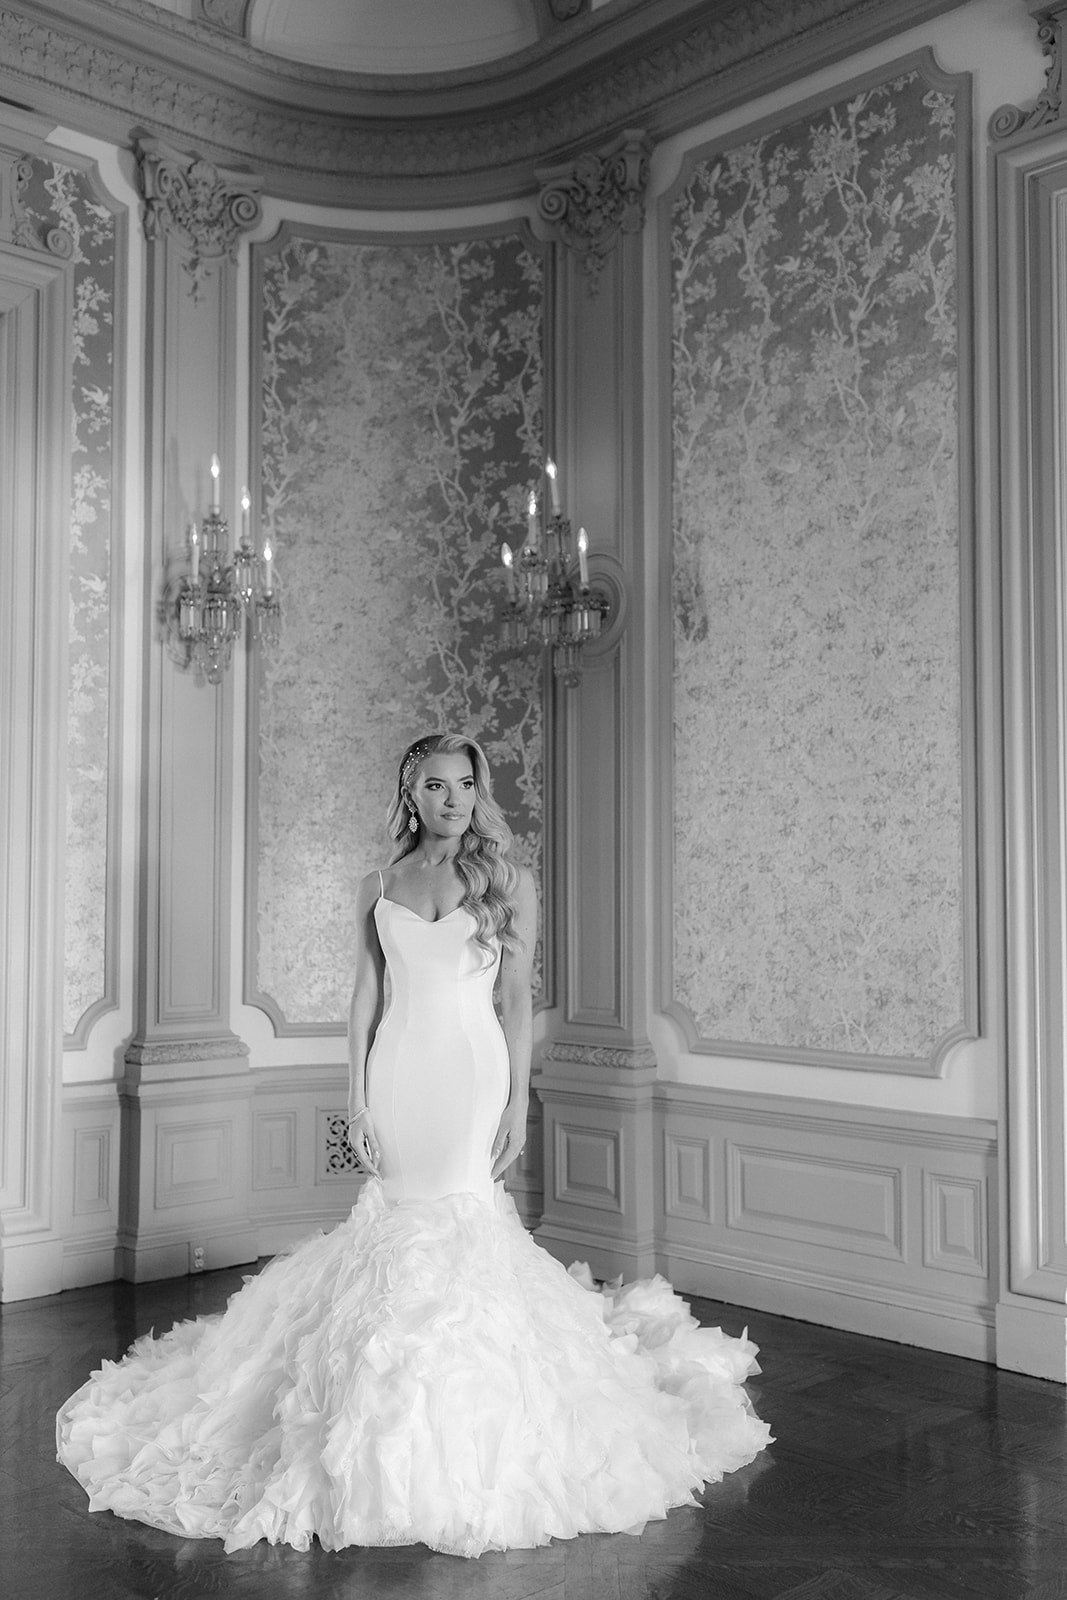 Bridal portraits in the Bourne Mansion.